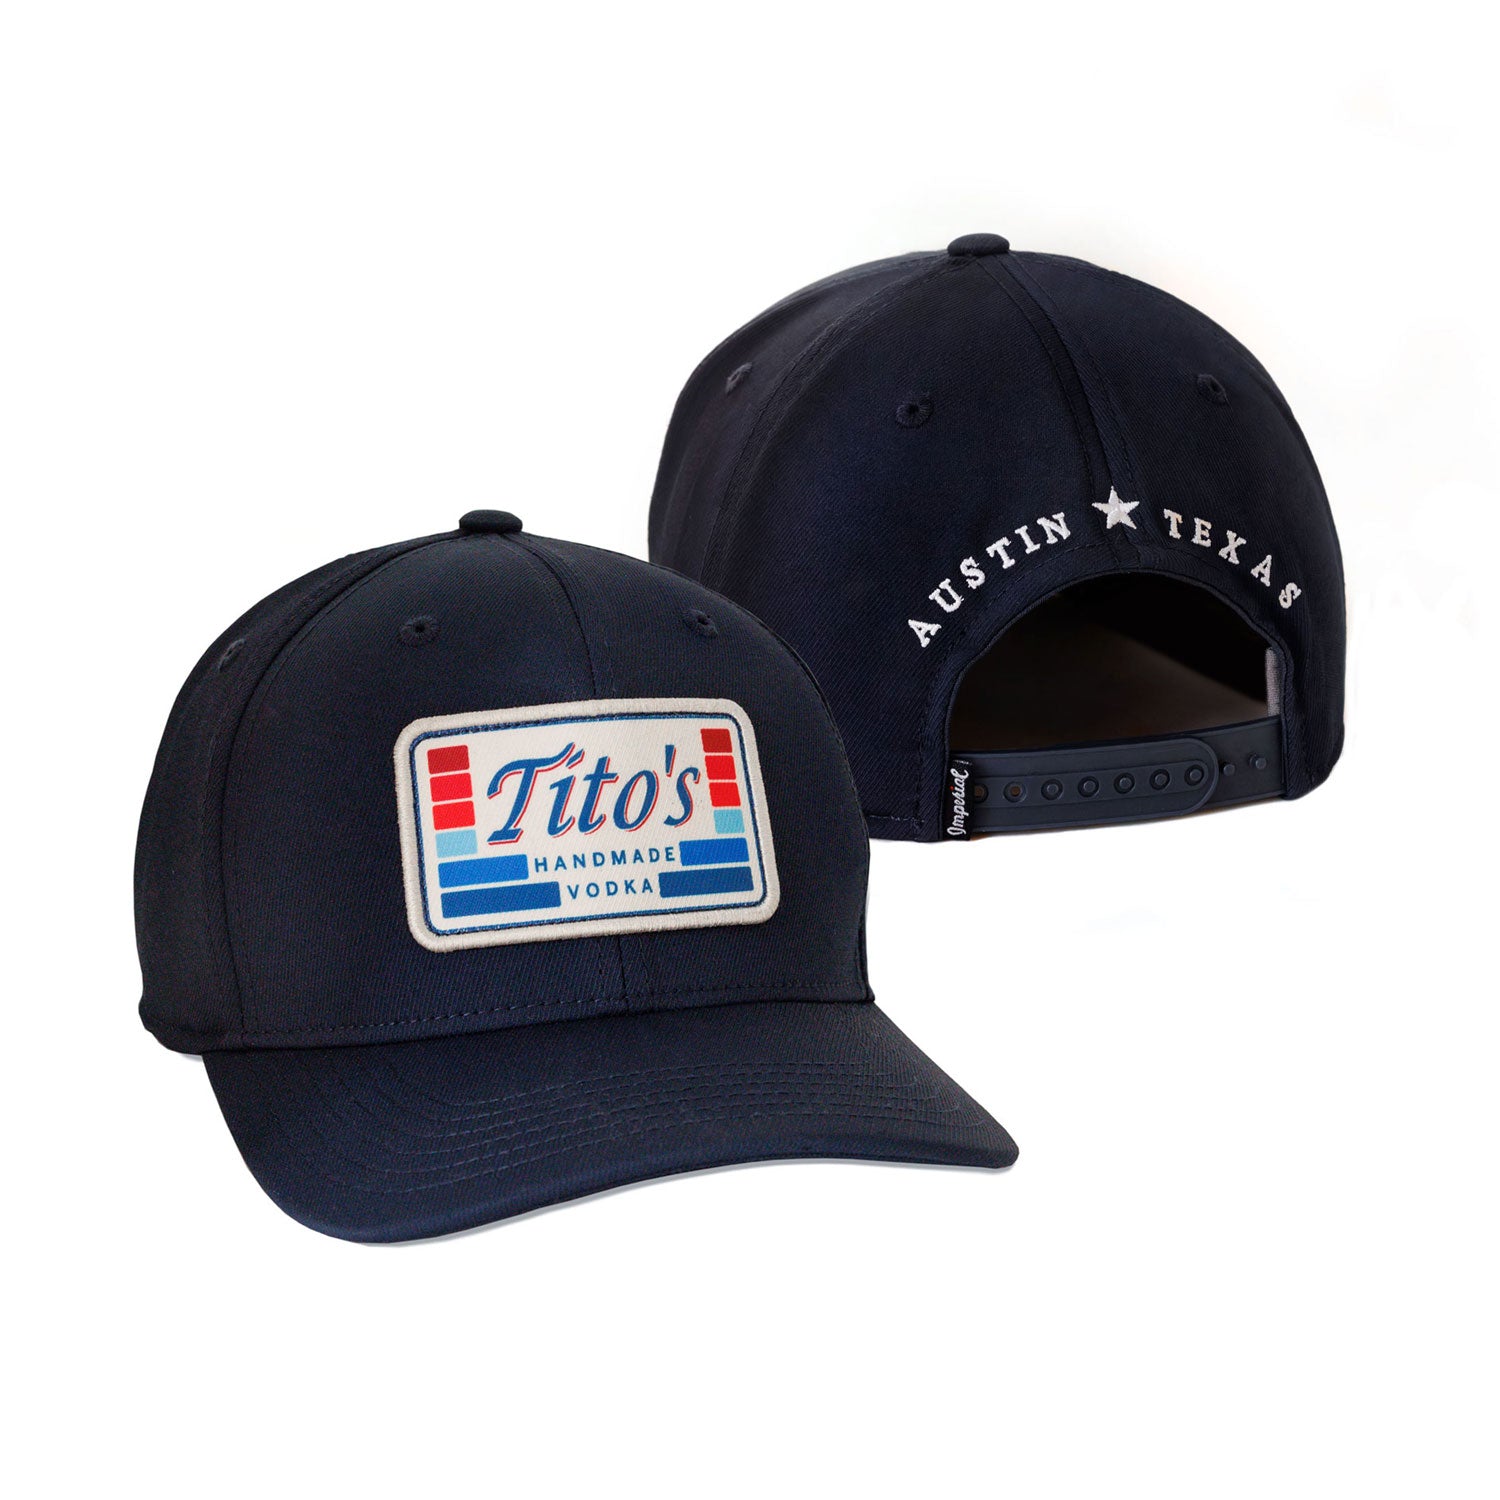 Navy snapback hat with Tito's Handmade Vodka patch on front and Austin, Texas on back